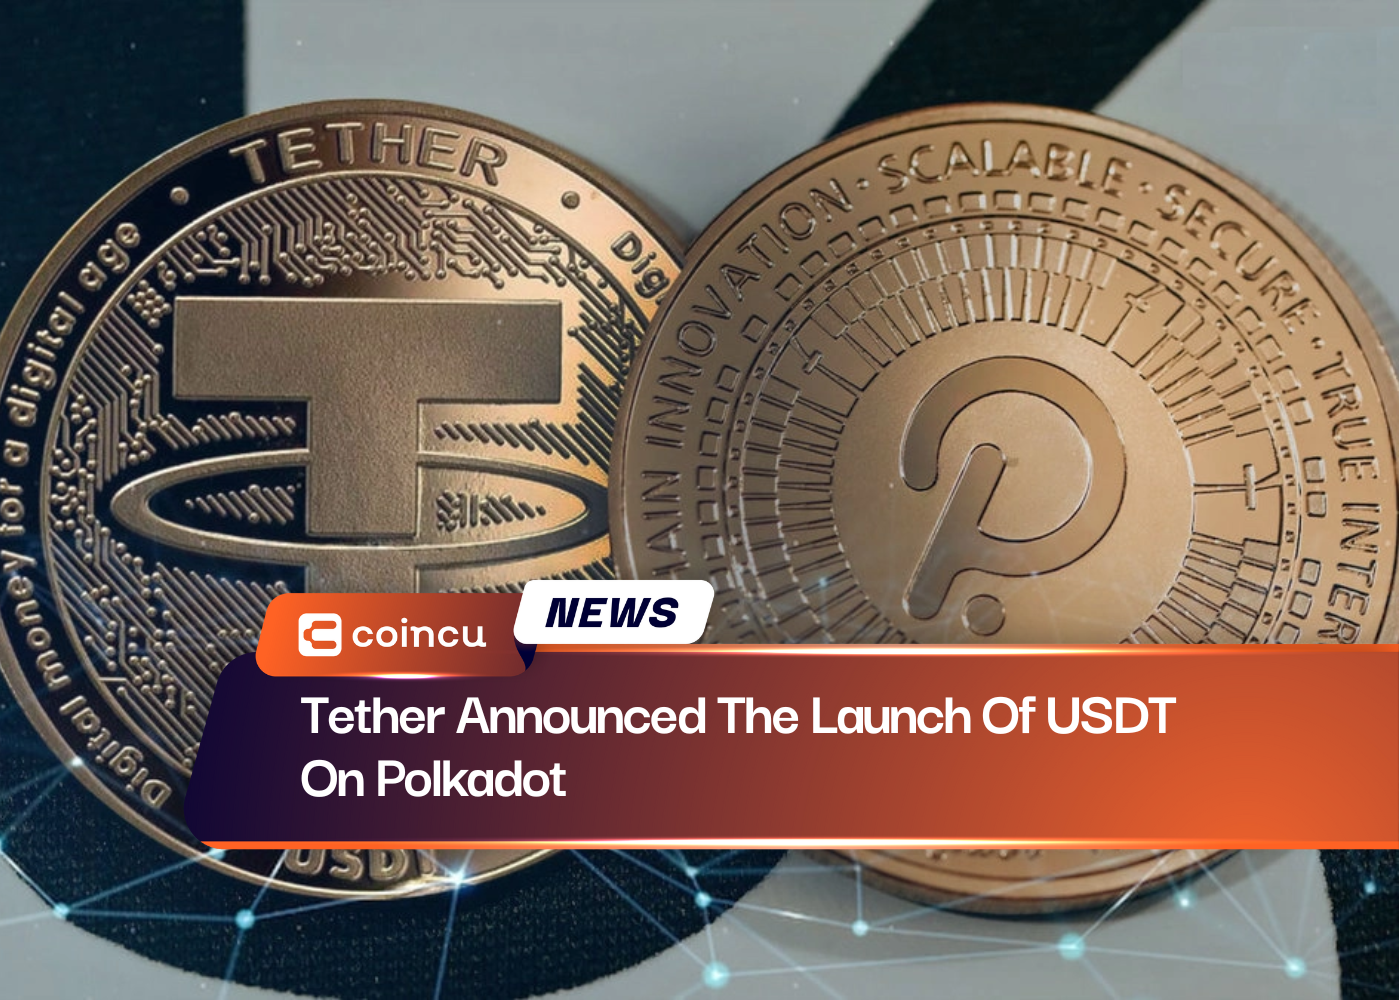 Tether Announced The Launch Of USDT On Polkadot